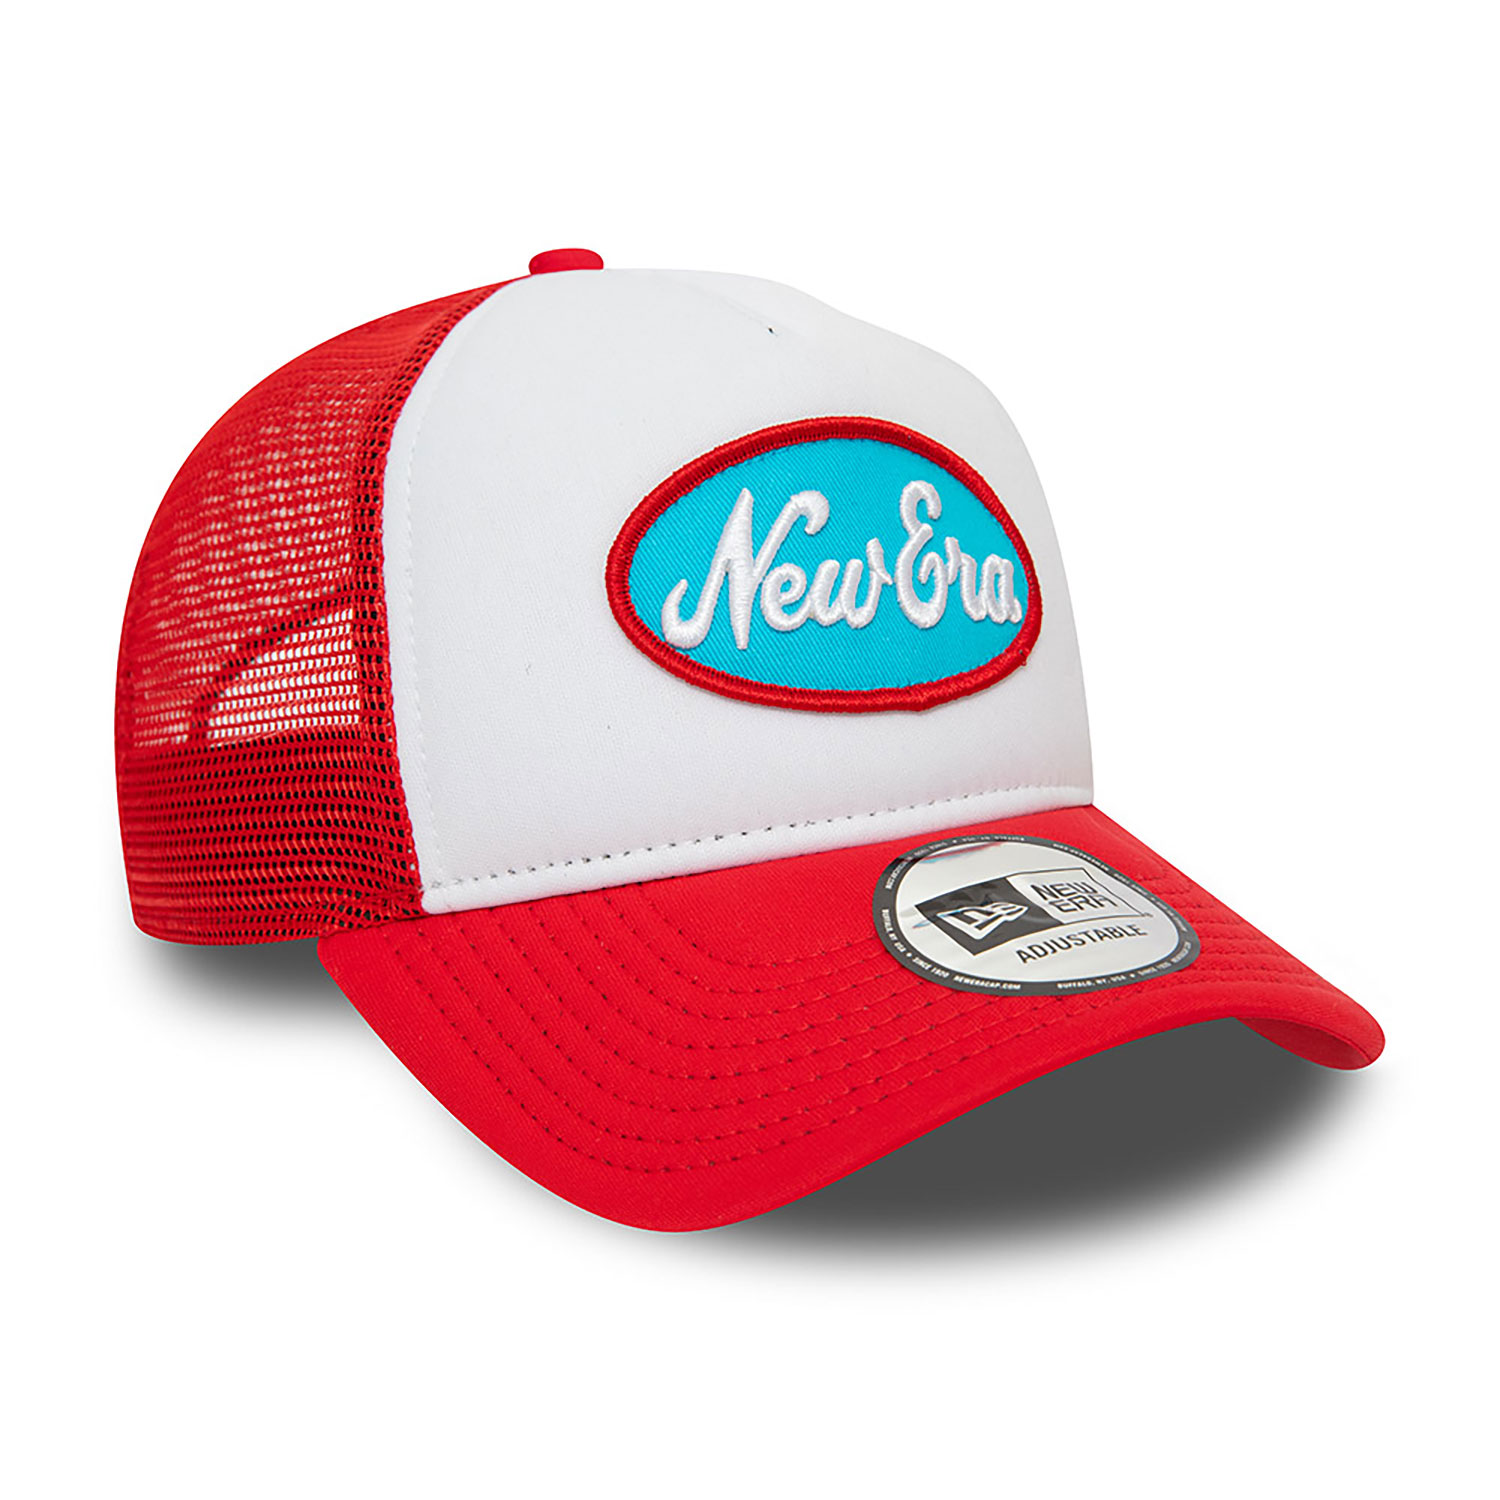 New Era Youth Red Oval Trucker Cap